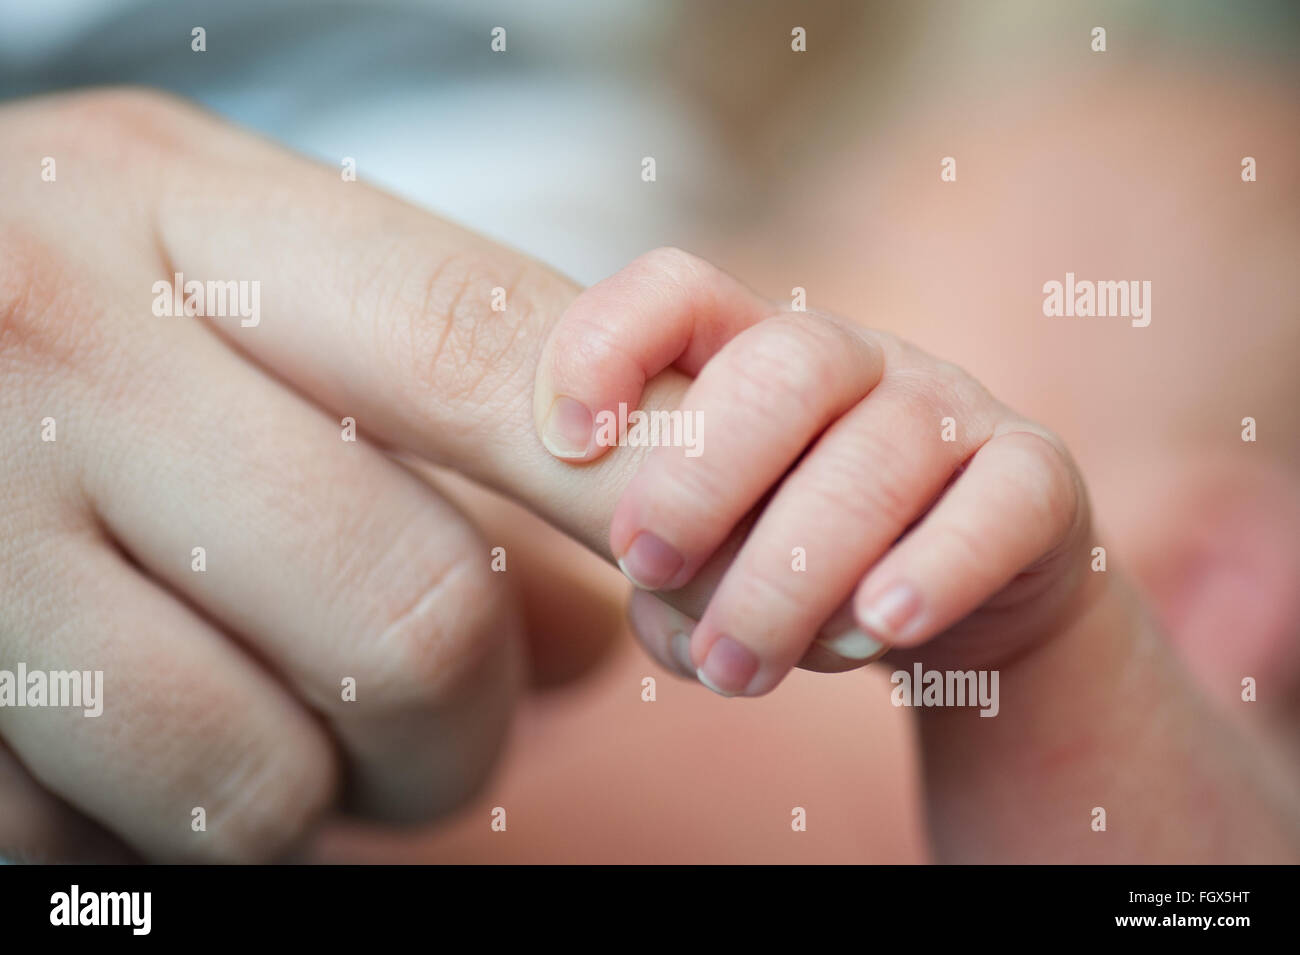 Close-up of baby's hand holding mother's finger with tenderness Stock Photo